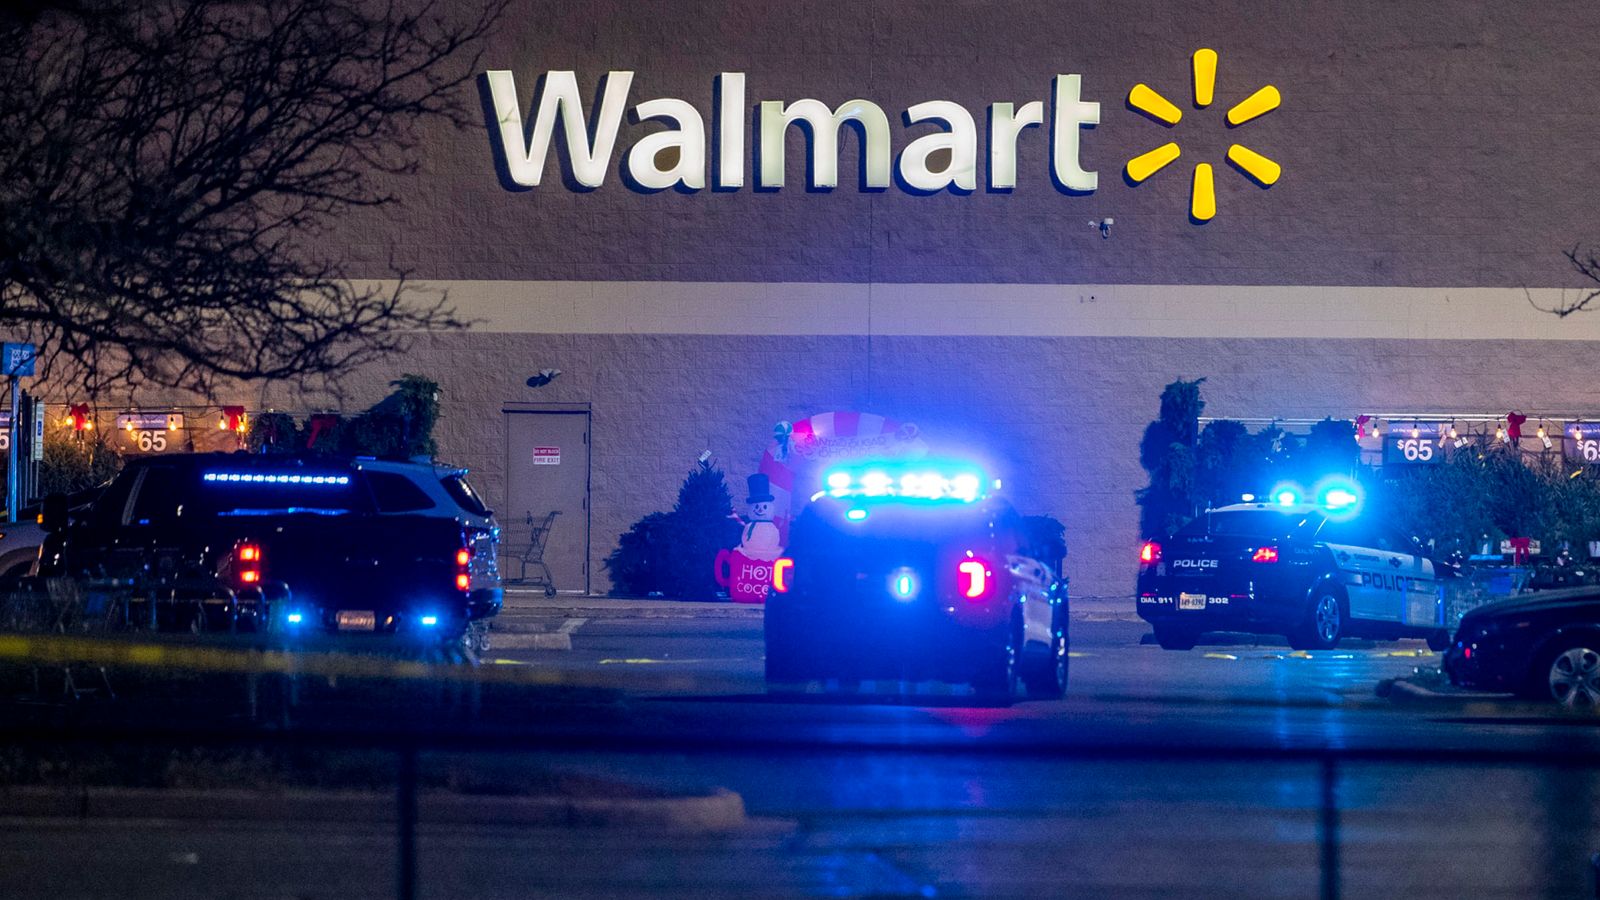 Multiple fatalities as 'manager' opens fire at Walmart store in Virginia